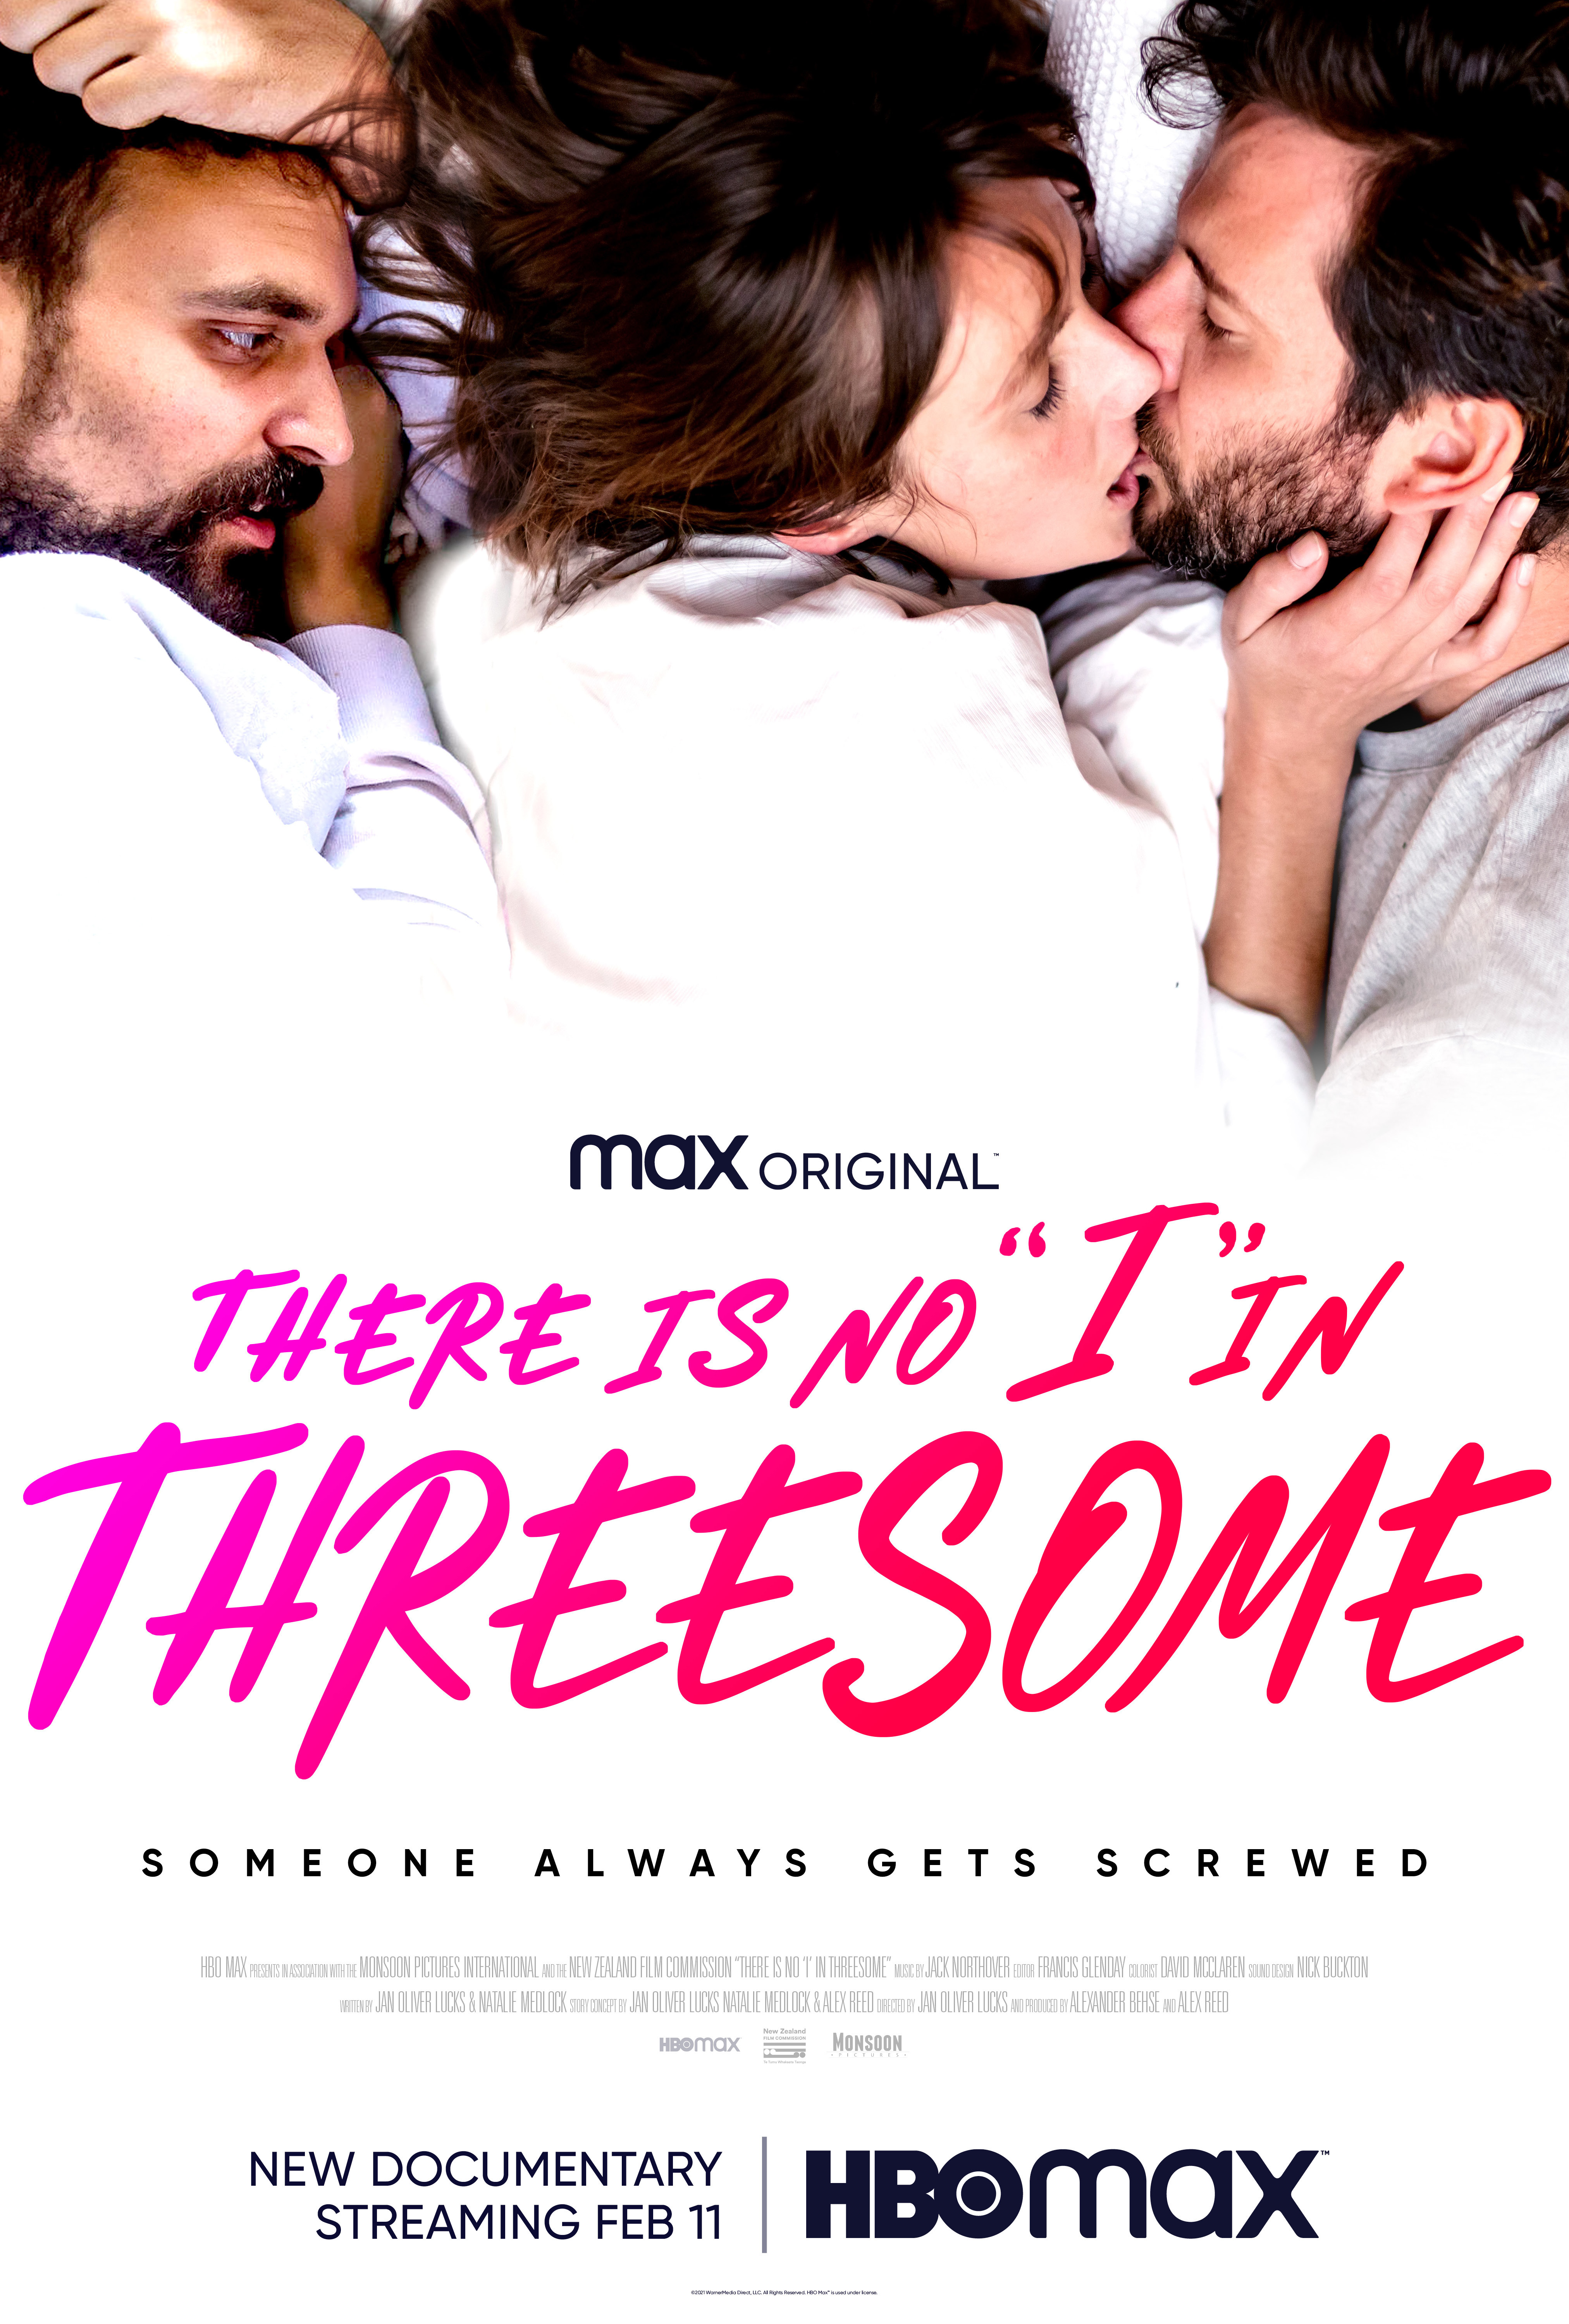 Theres no i in threesome documentary